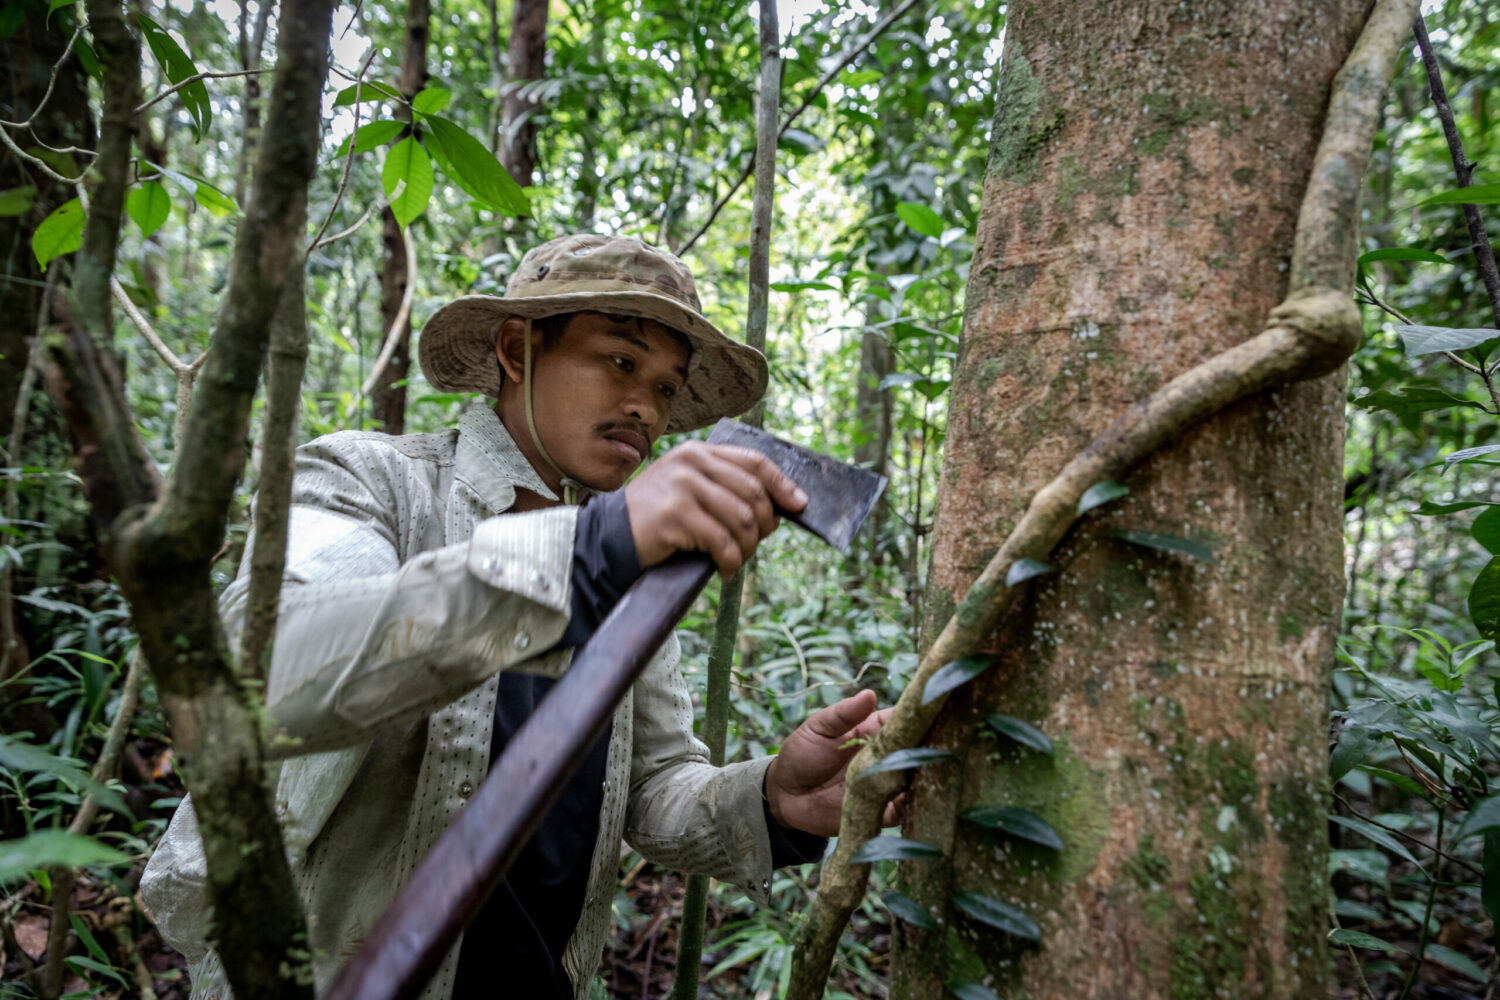 Hing Sao, 32, carefully cuts bark from a tree in the forests of Cardamom Protected Forest on August 2, 2022. (Roun Ry/VOD)